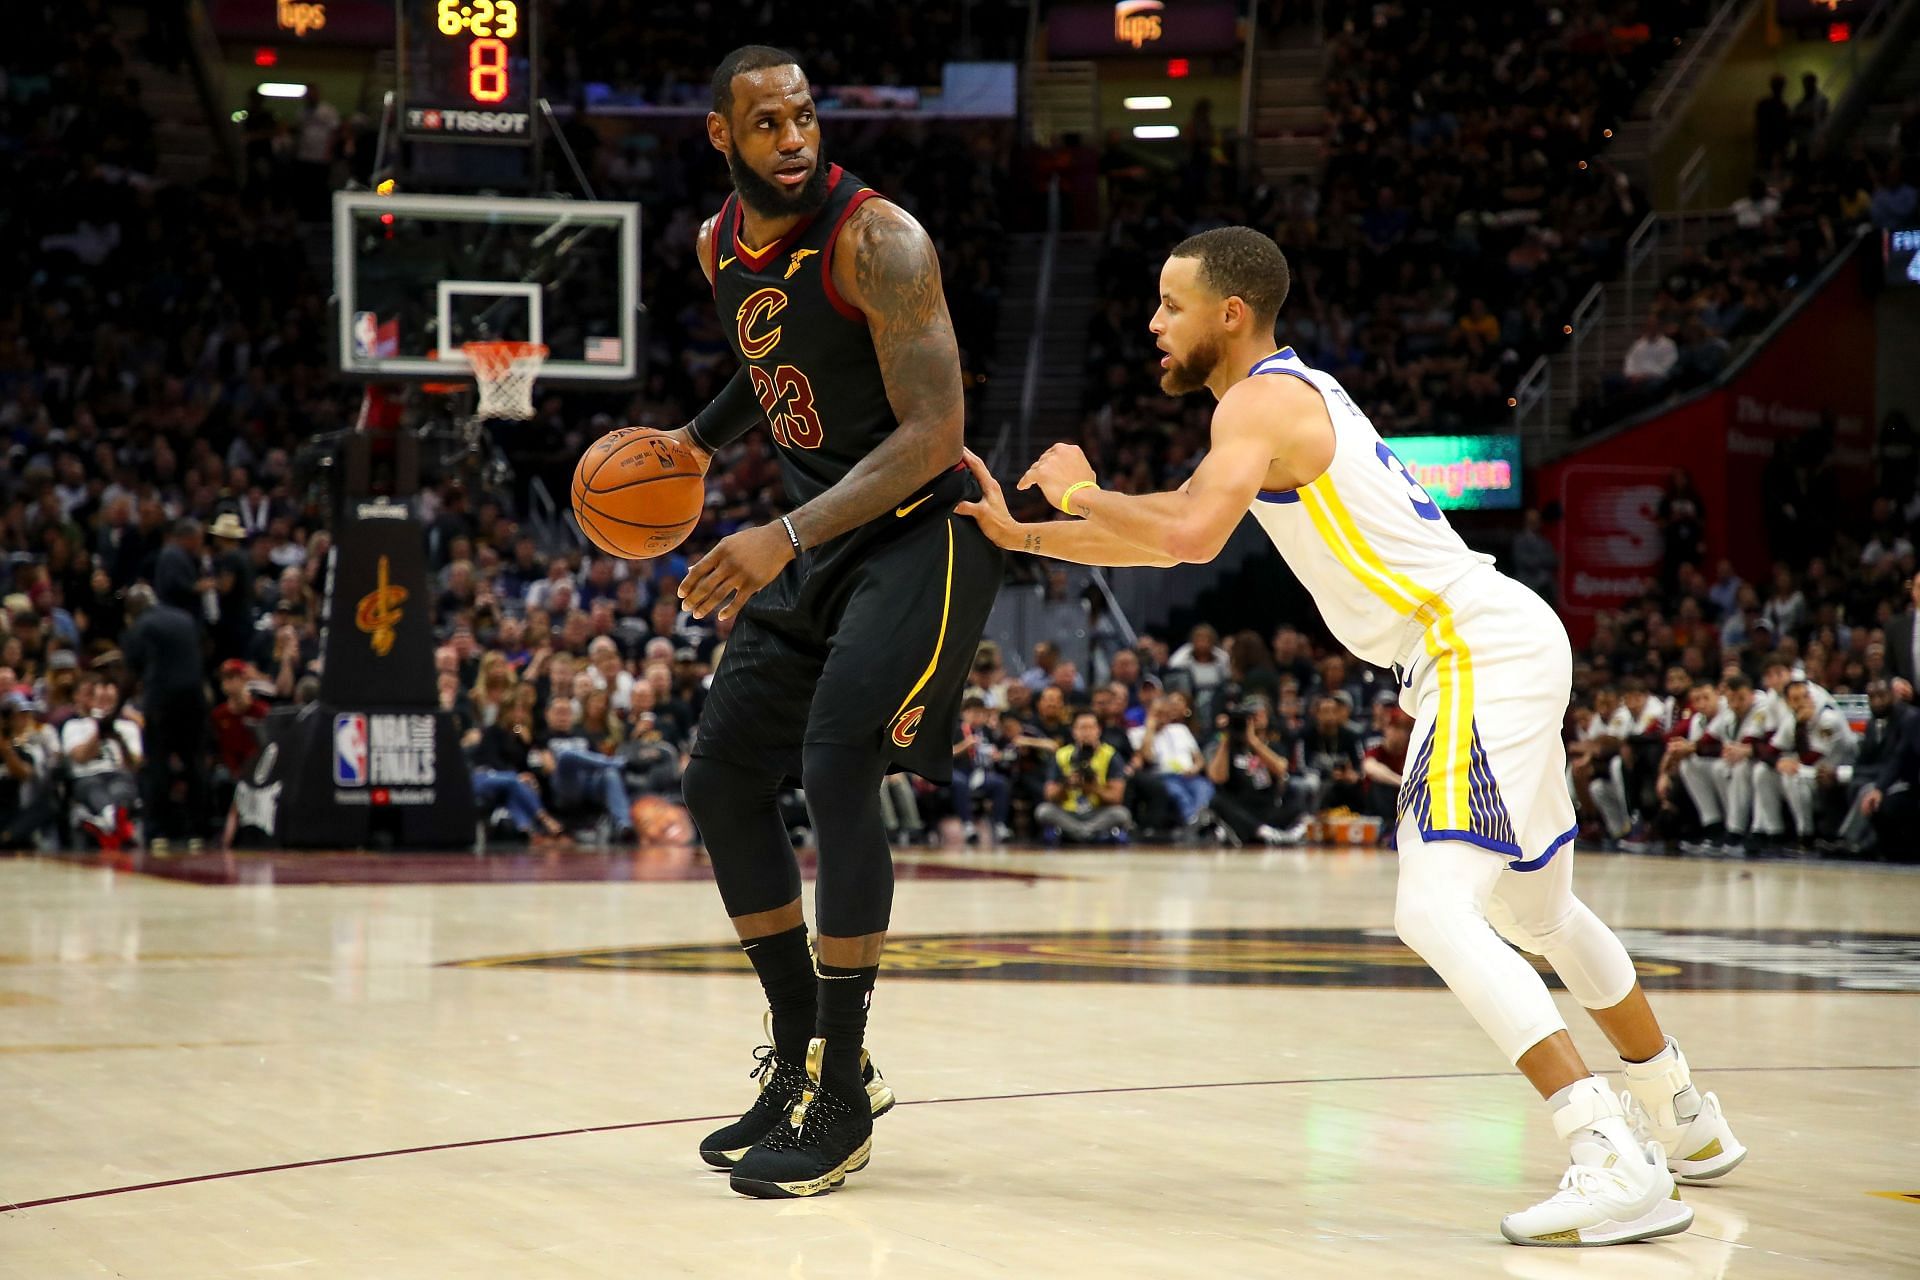 LeBron James against Stephen Curry in Game 4 of the 2018 NBA Finals